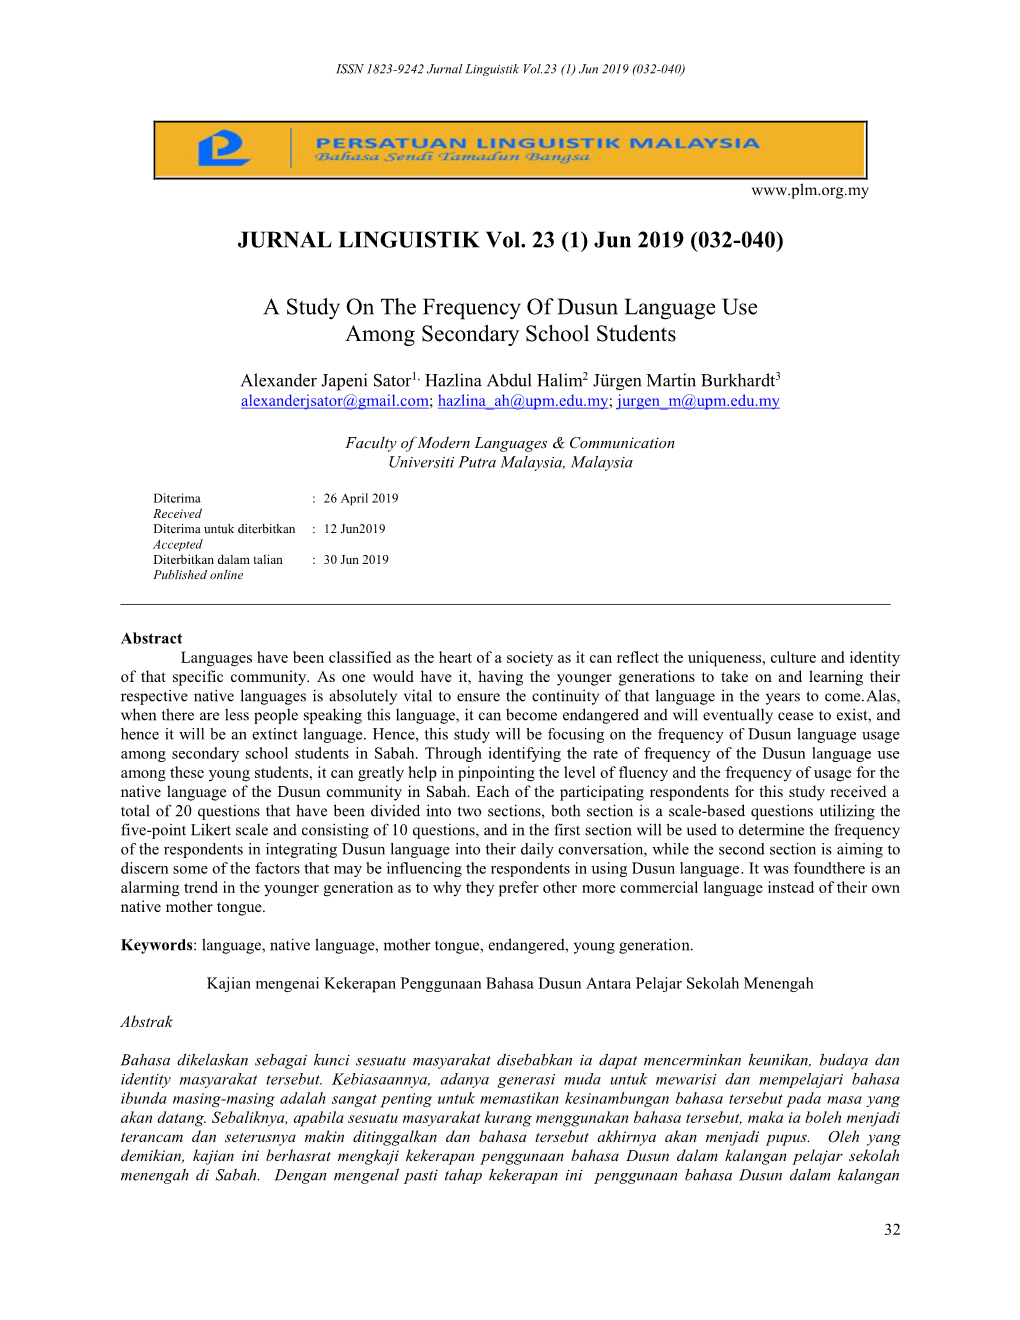 JURNAL LINGUISTIK Vol. 23 (1) Jun 2019 (032-040) a Study on the Frequency of Dusun Language Use Among Secondary School Students